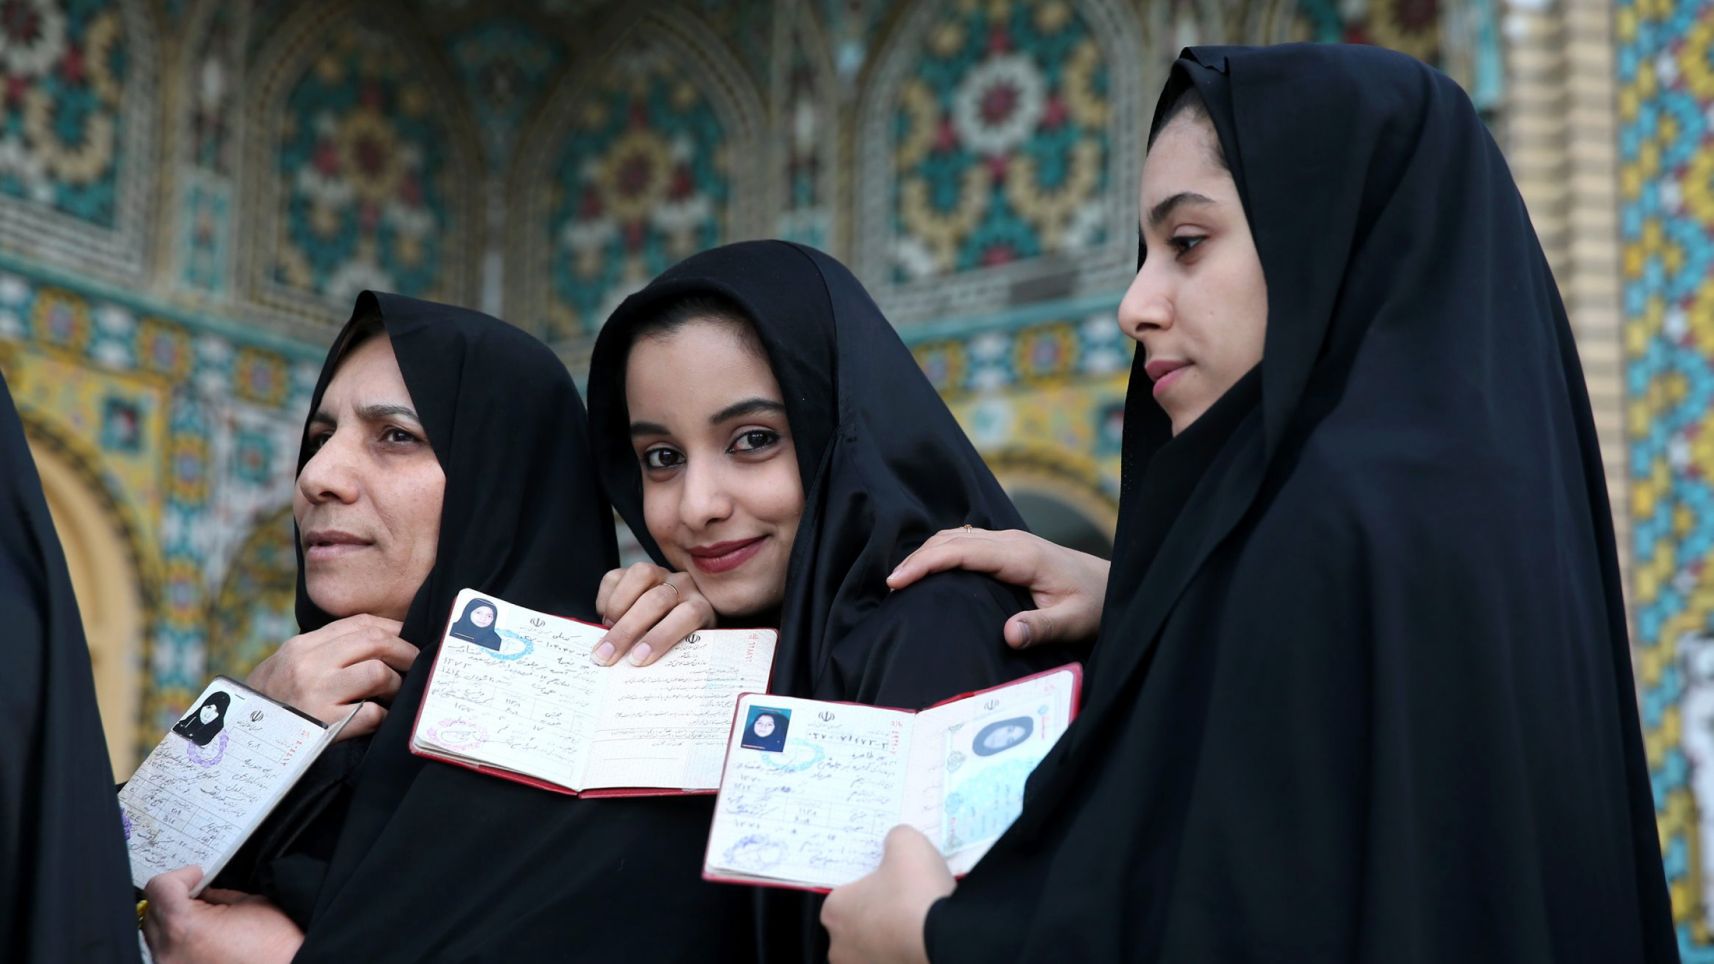 Reformists Set to Make Gains in Iranian Election - MPC JOURNAL - Iranian women show their identification, as they queue in a polling station to vote for the parliamentary and Experts Assembly elections in Qom.AP MPC Journal